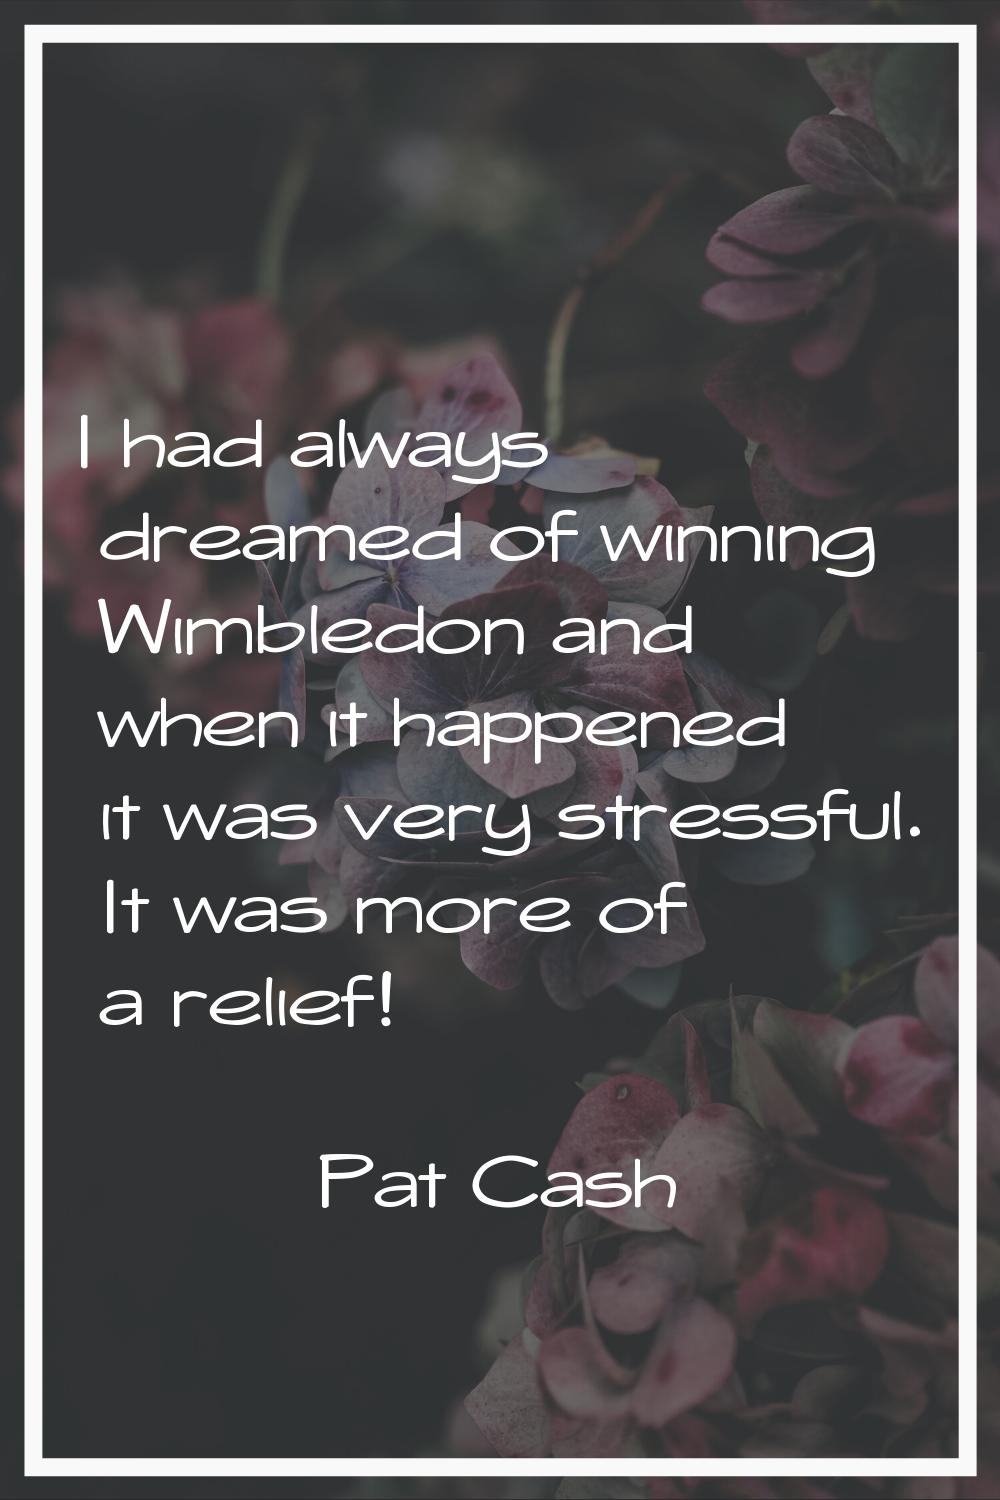 I had always dreamed of winning Wimbledon and when it happened it was very stressful. It was more o